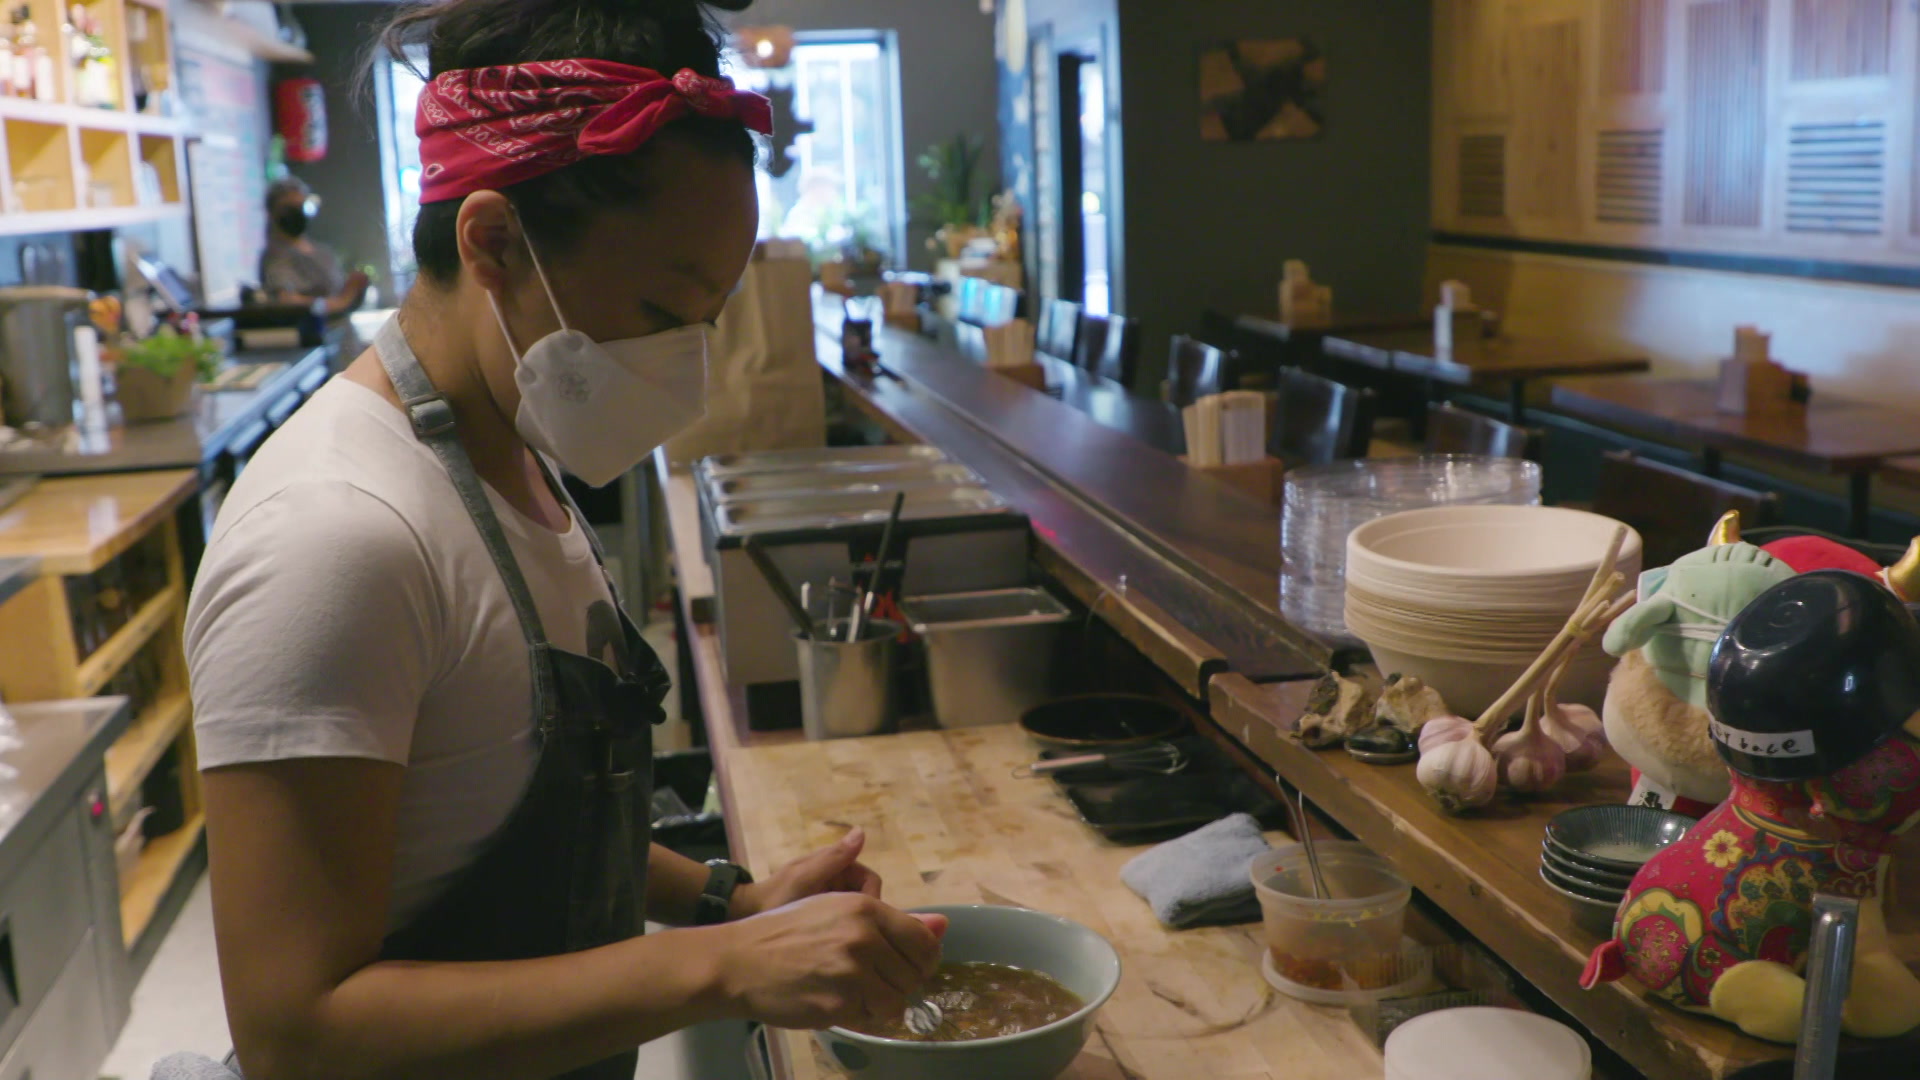 Francesca Hong stands behind a restaurant counter and prepares a bowl of soup.